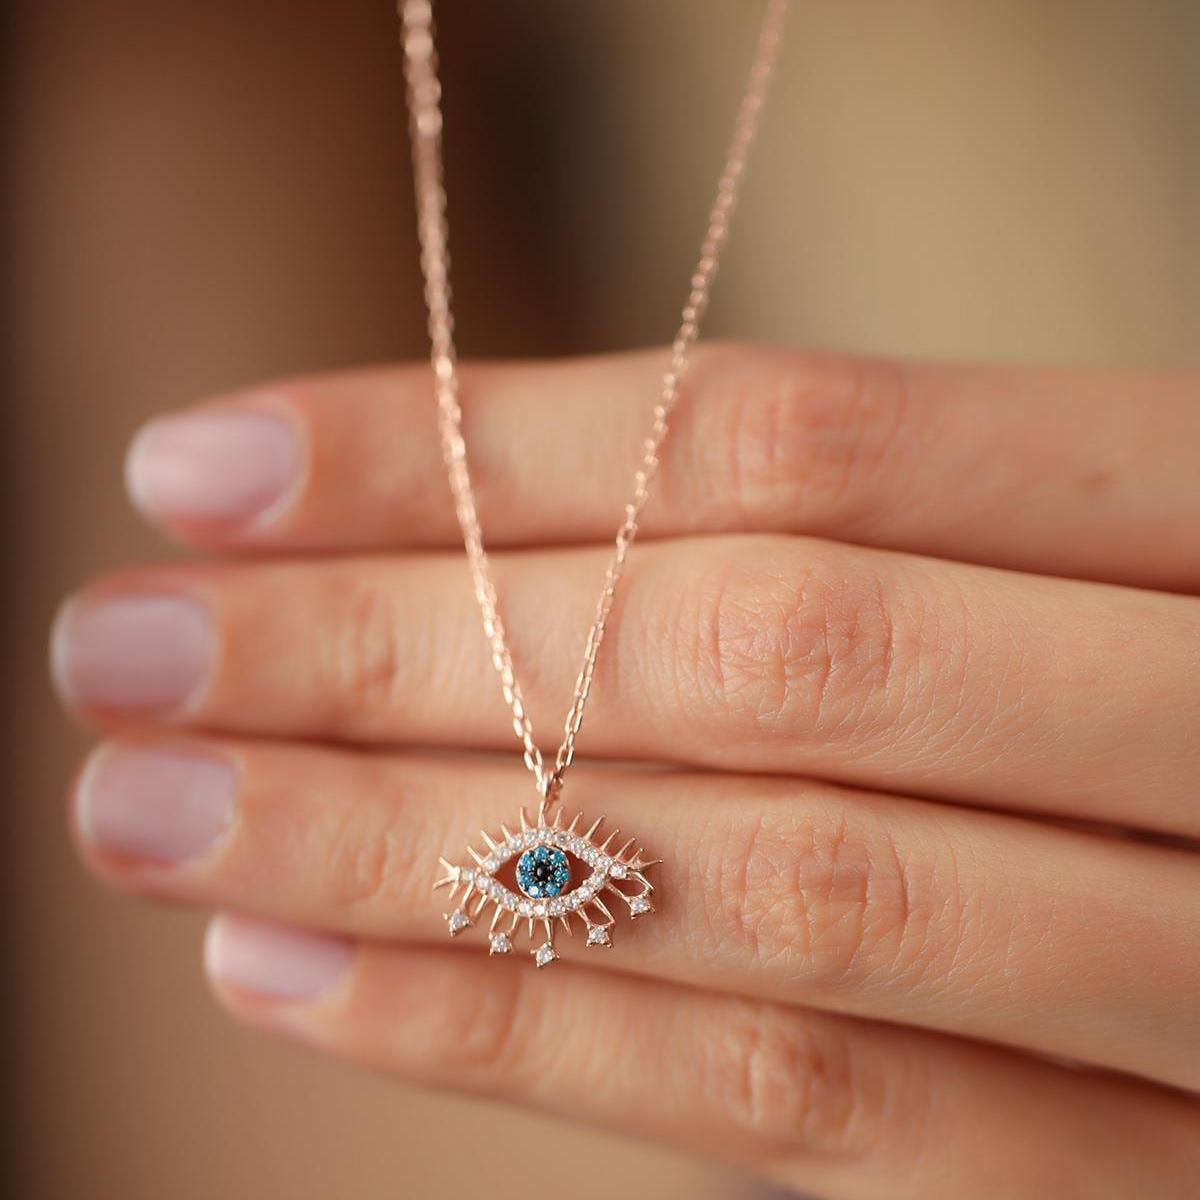 Eye Of Horus Necklace • Third Eye Necklace • Evil Eye Necklace Gold - Trending Silver Gifts